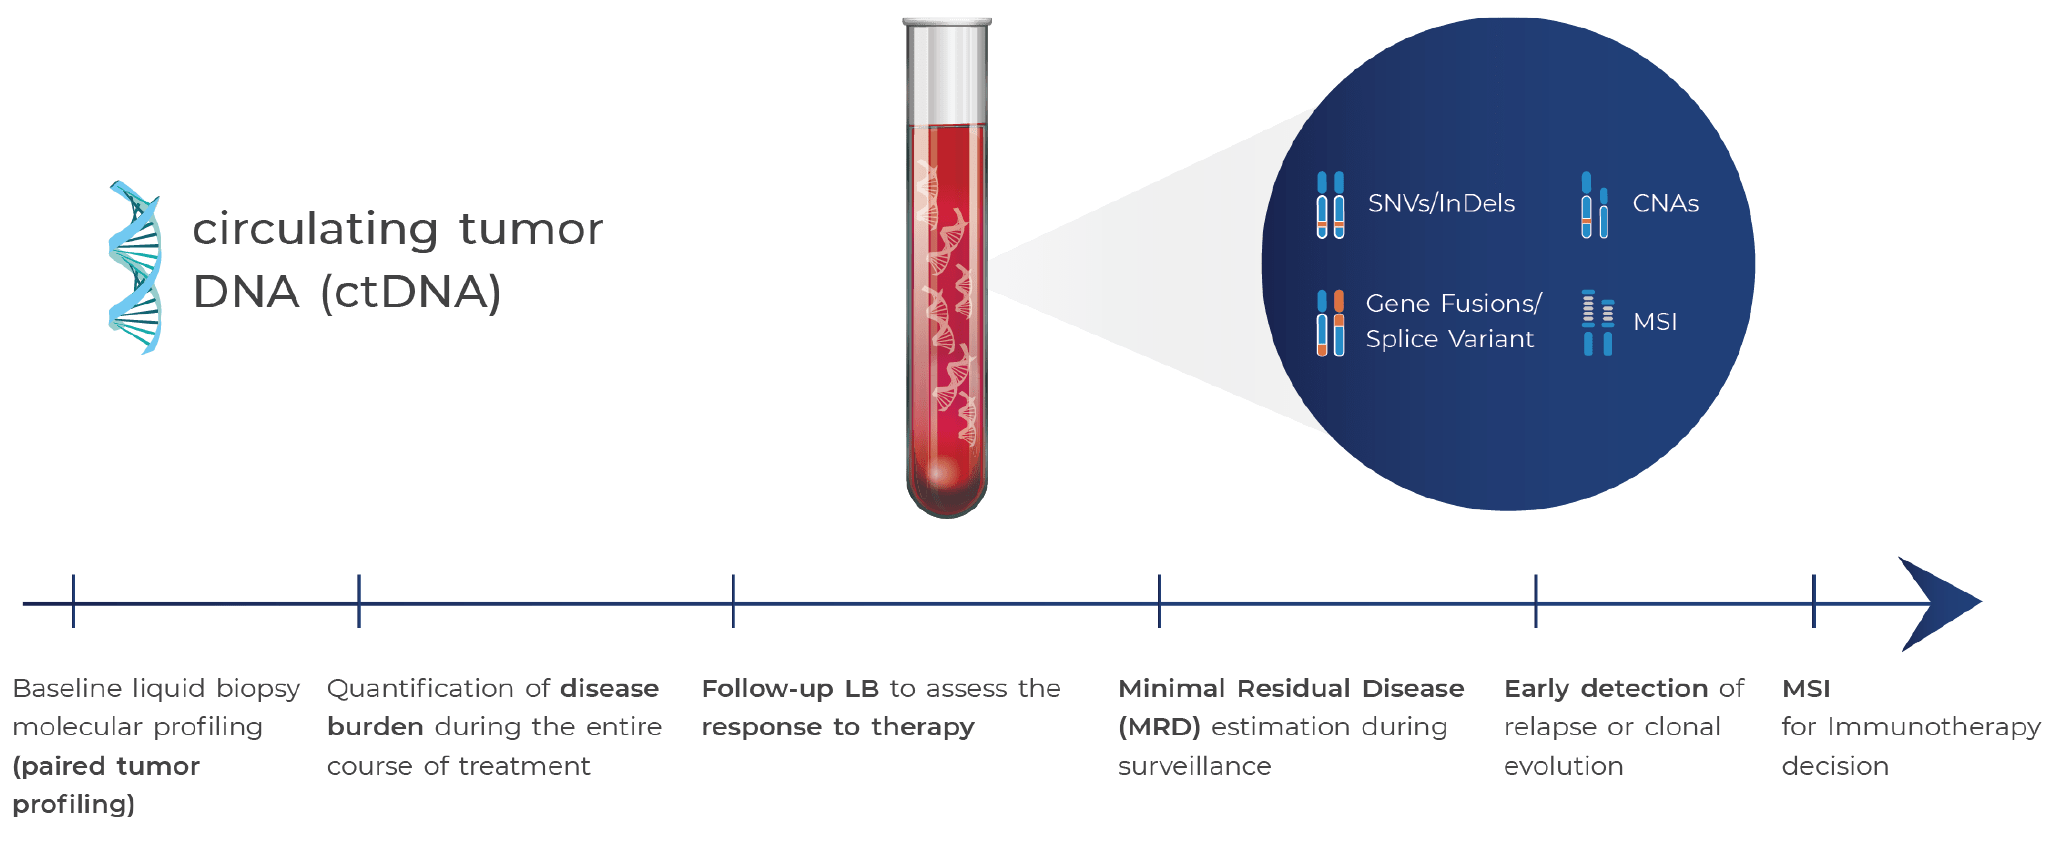 cfDNA analysis through Liquid Biopsy and their application